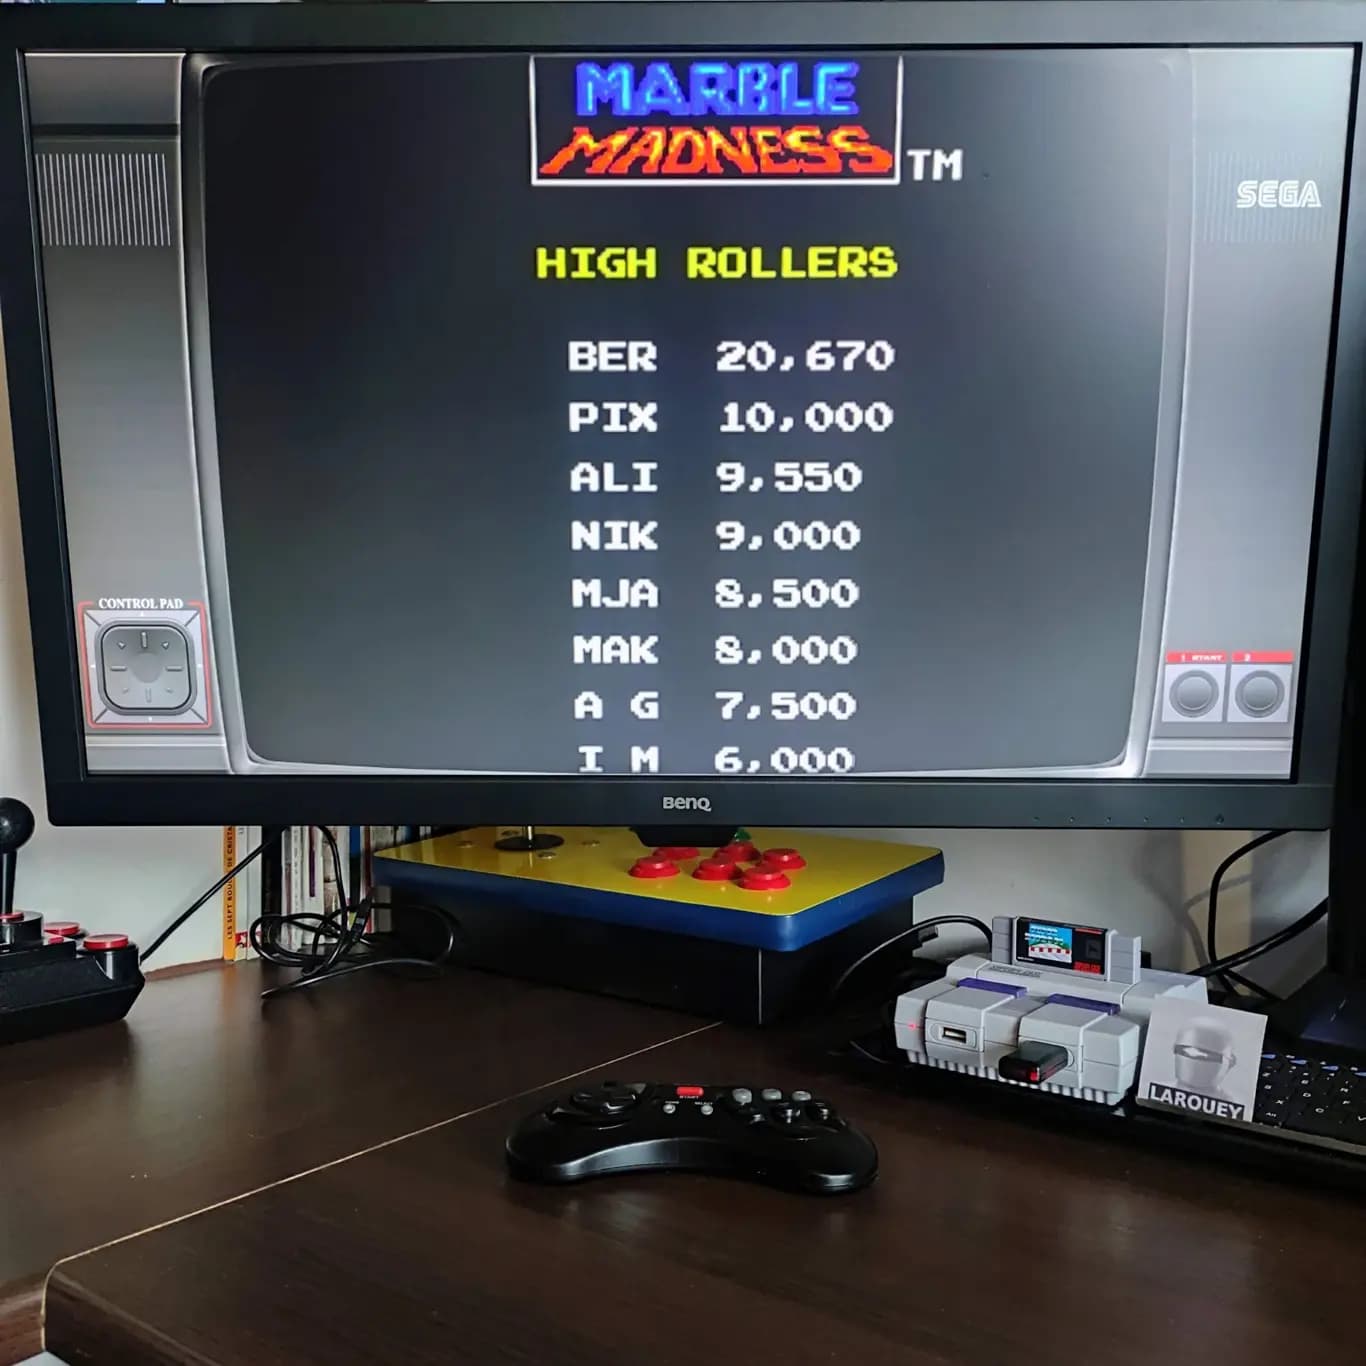 Larquey: Marble Madness (Sega Master System Emulated) 20,670 points on 2022-08-11 08:28:38